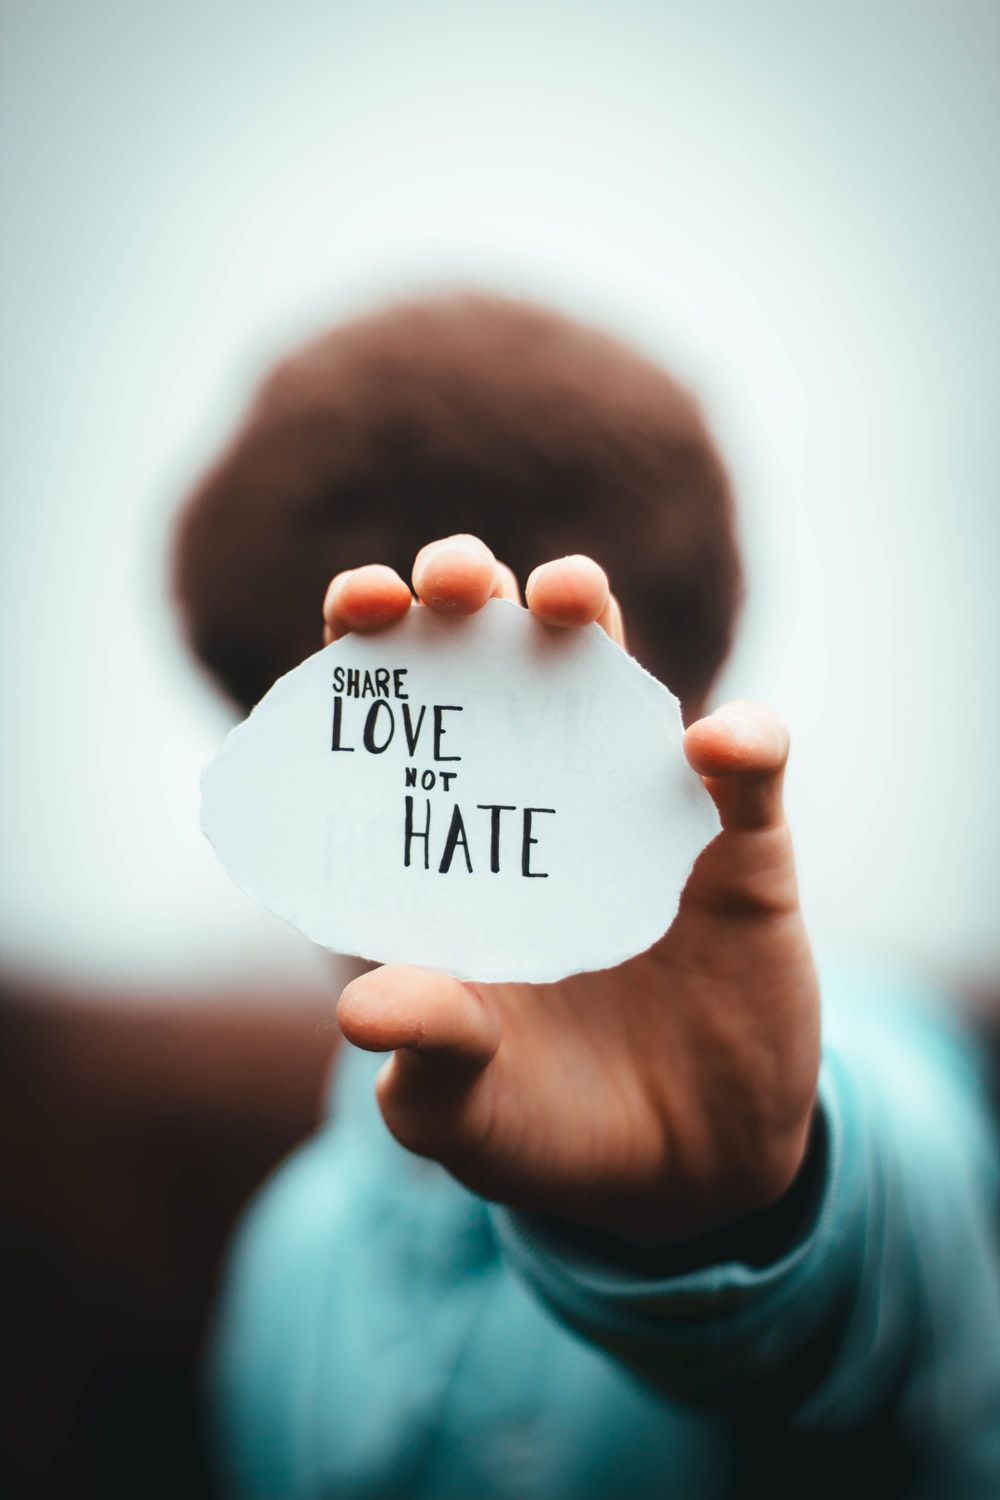 Love And Hate Picture. Download Free Image